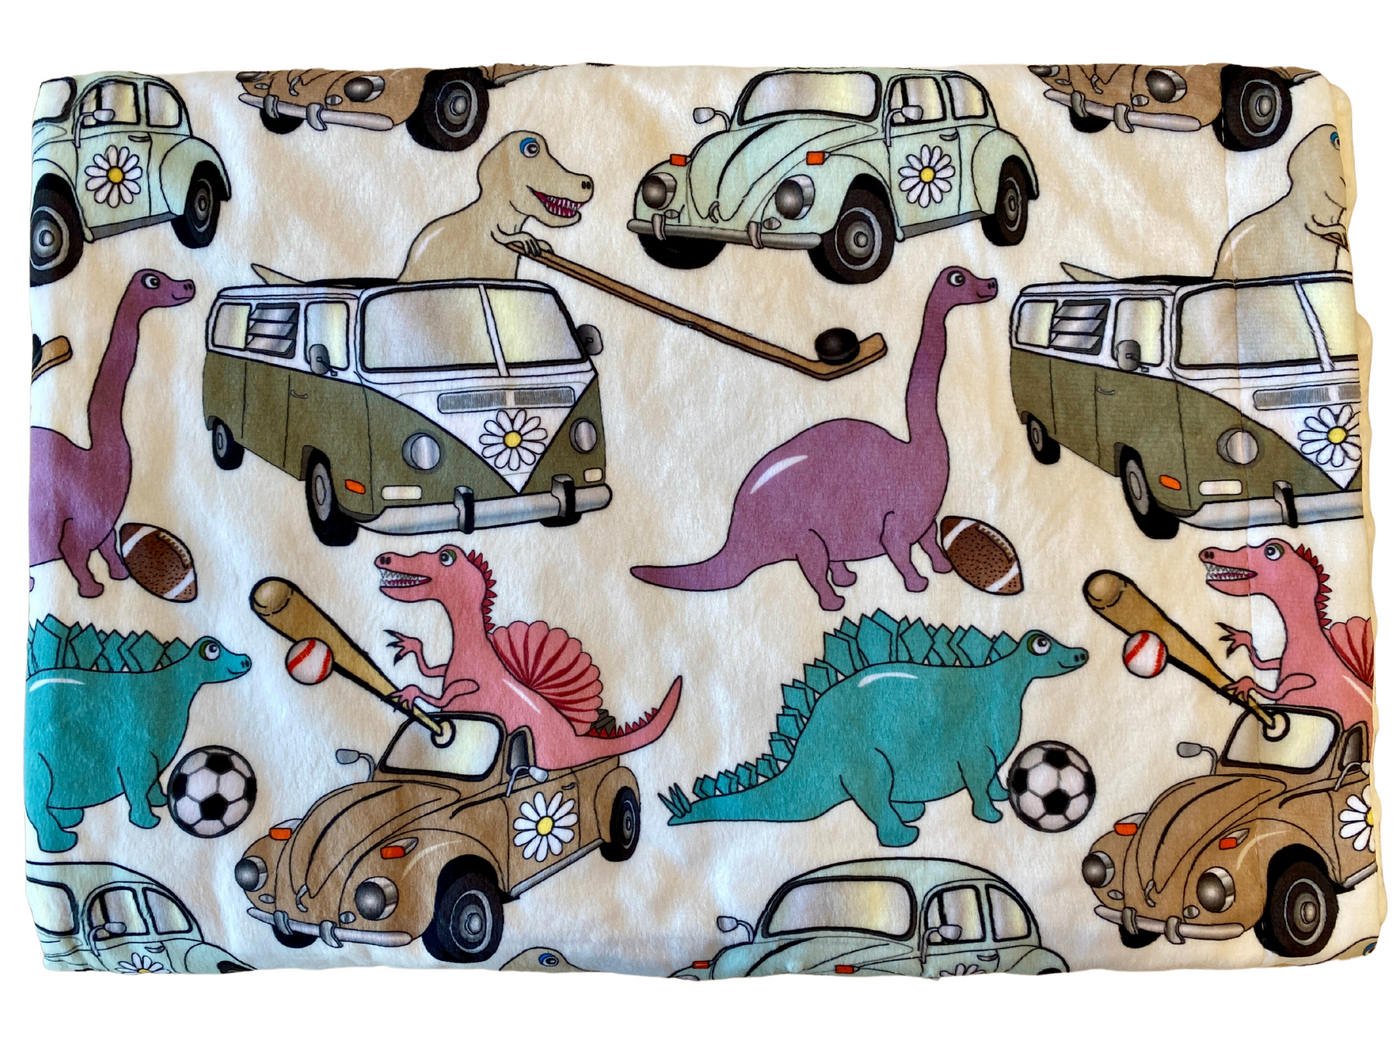 Baby blanket: The Dinosaurs in their car